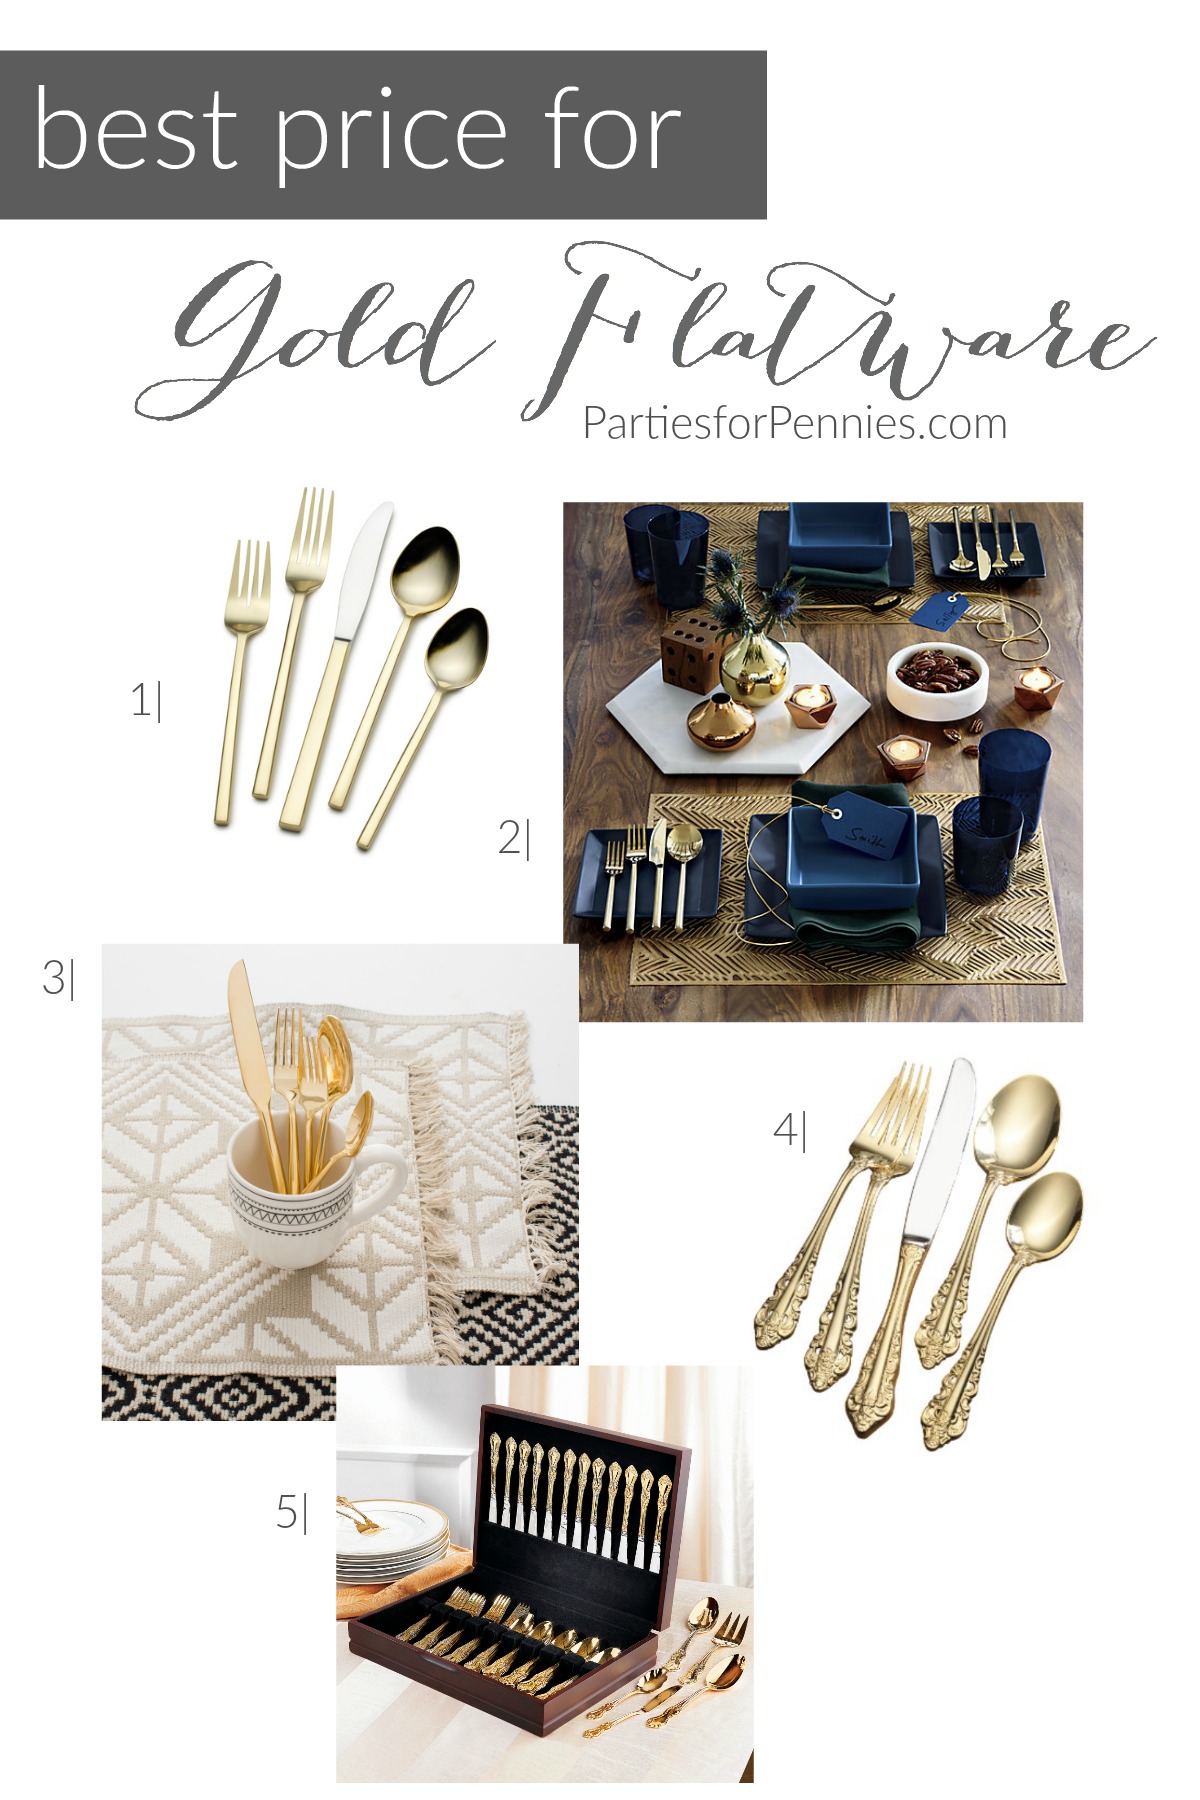 Best Price for Gold Flatware | PartiesforPennies.com | Love Gold Flatware but hate the price? Find the best price and deals on gold flatware anywhere! 